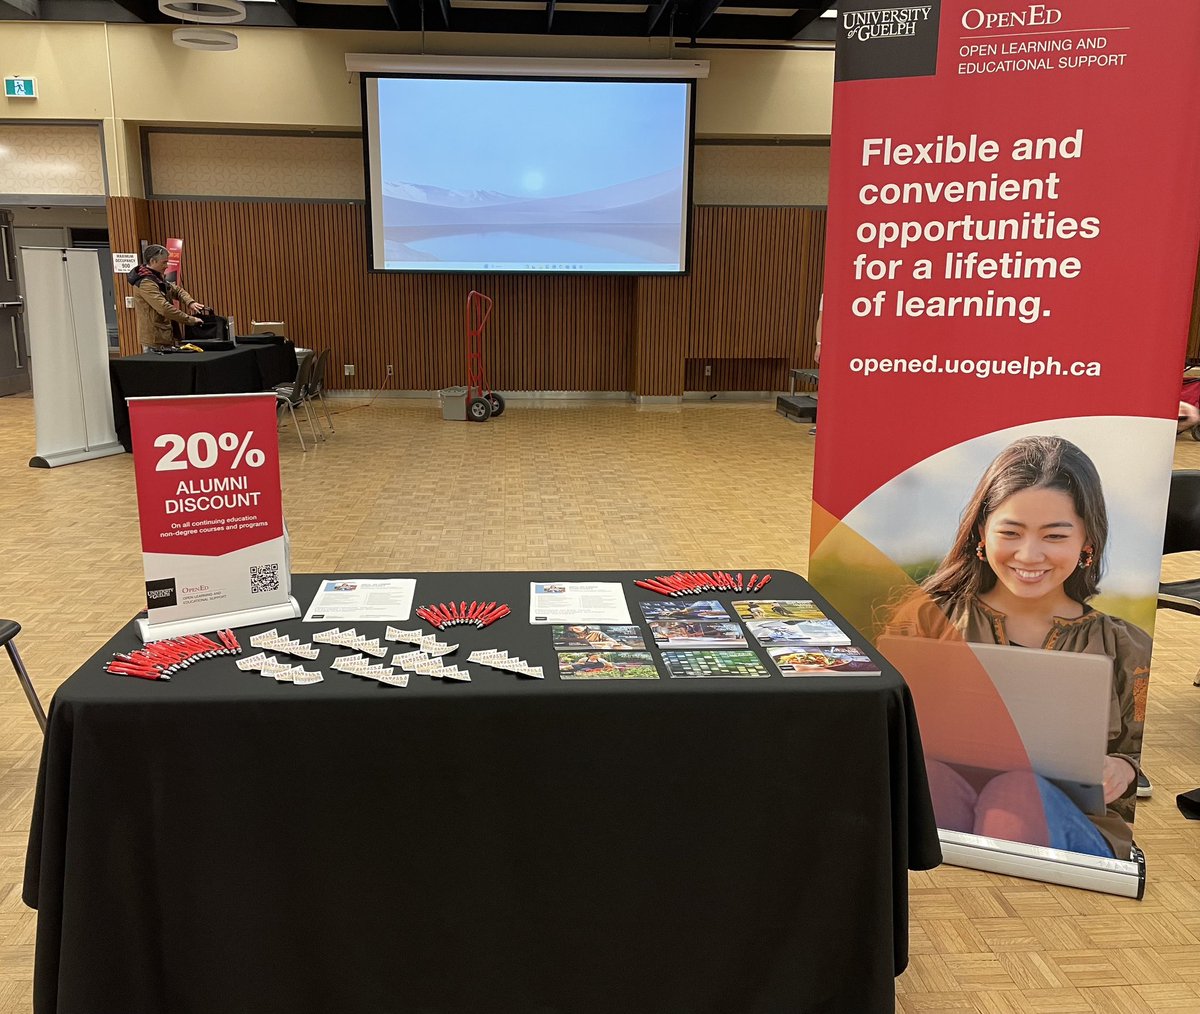 New @uofg grad? 

Check out the OpenEd table and learn how you can save 20% on our courses and programs! #GradLaunch #ForeverAGryphon @UofGAlumni